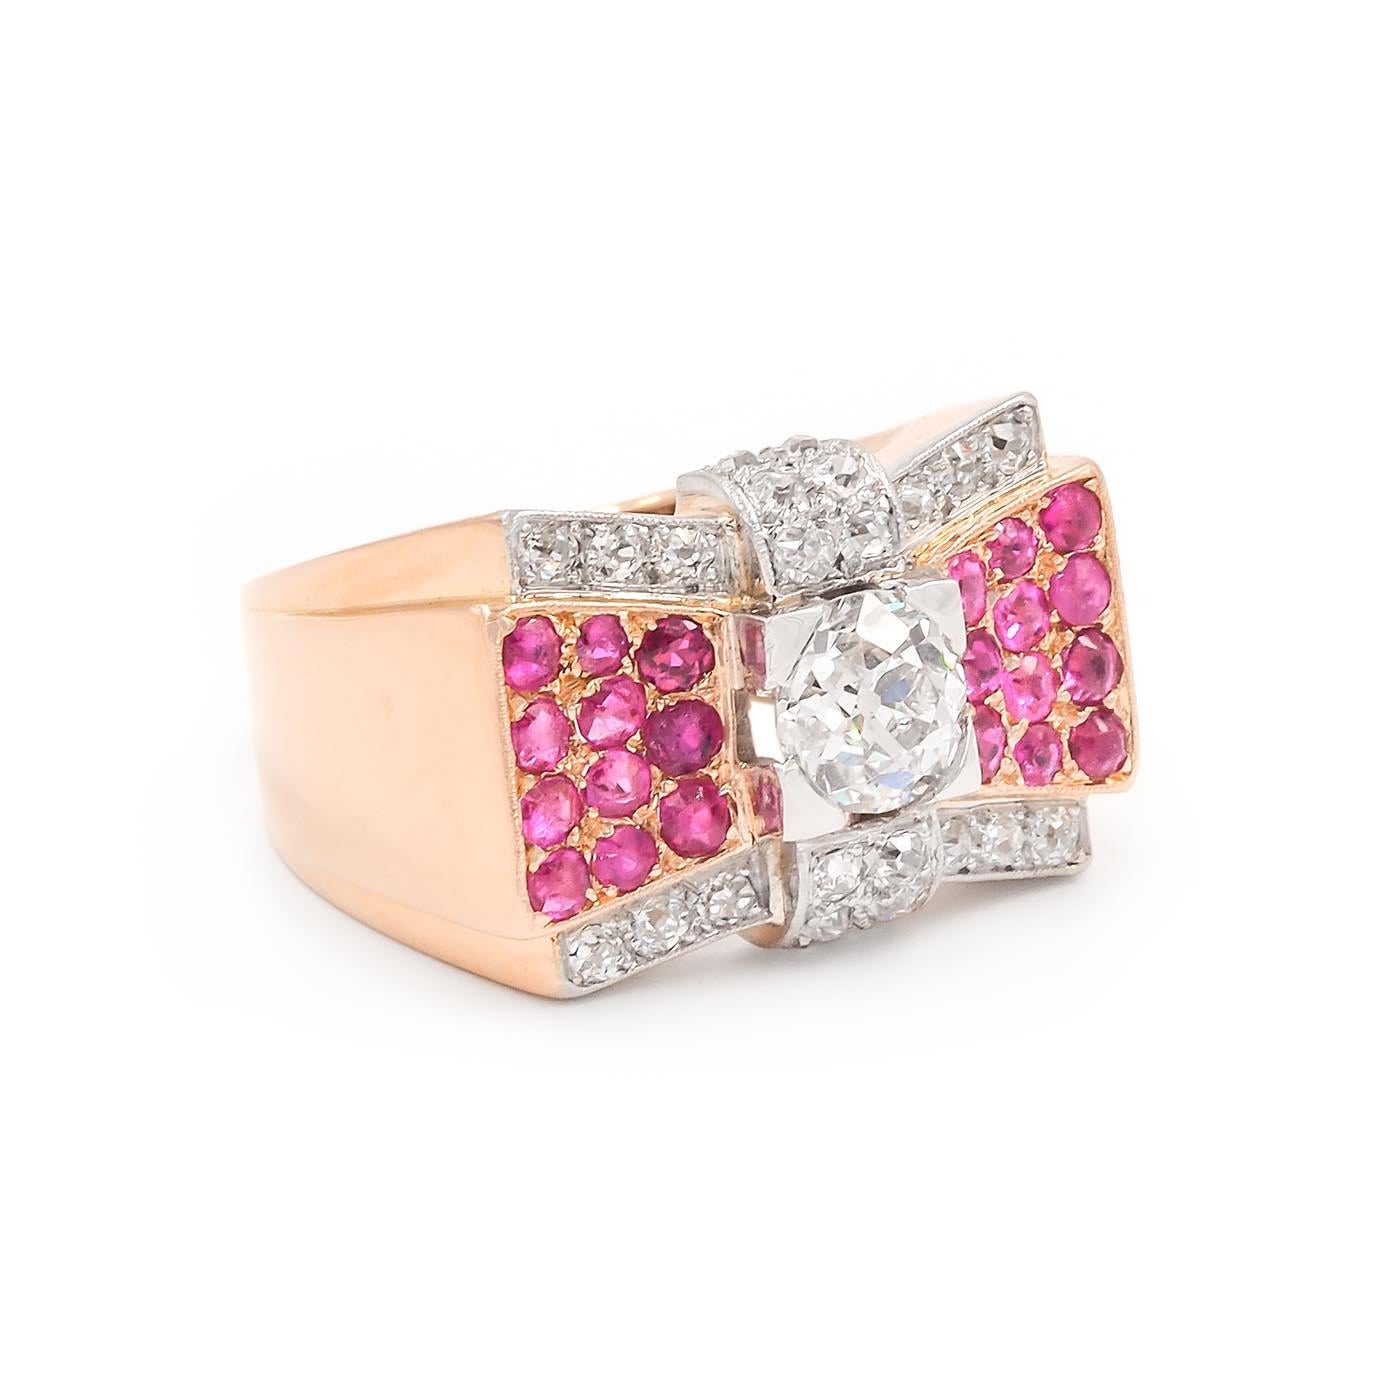 French Retro 1.14 Carat Old Mine Cut Diamond & Ruby Tank Ring composed of 18k yellow gold and platinum. The 1.14 carat Old Mine Cut diamond is GIA certified K color/I1 clarity, set at the center. With an additional 36 Old Mine Cut diamonds weighing